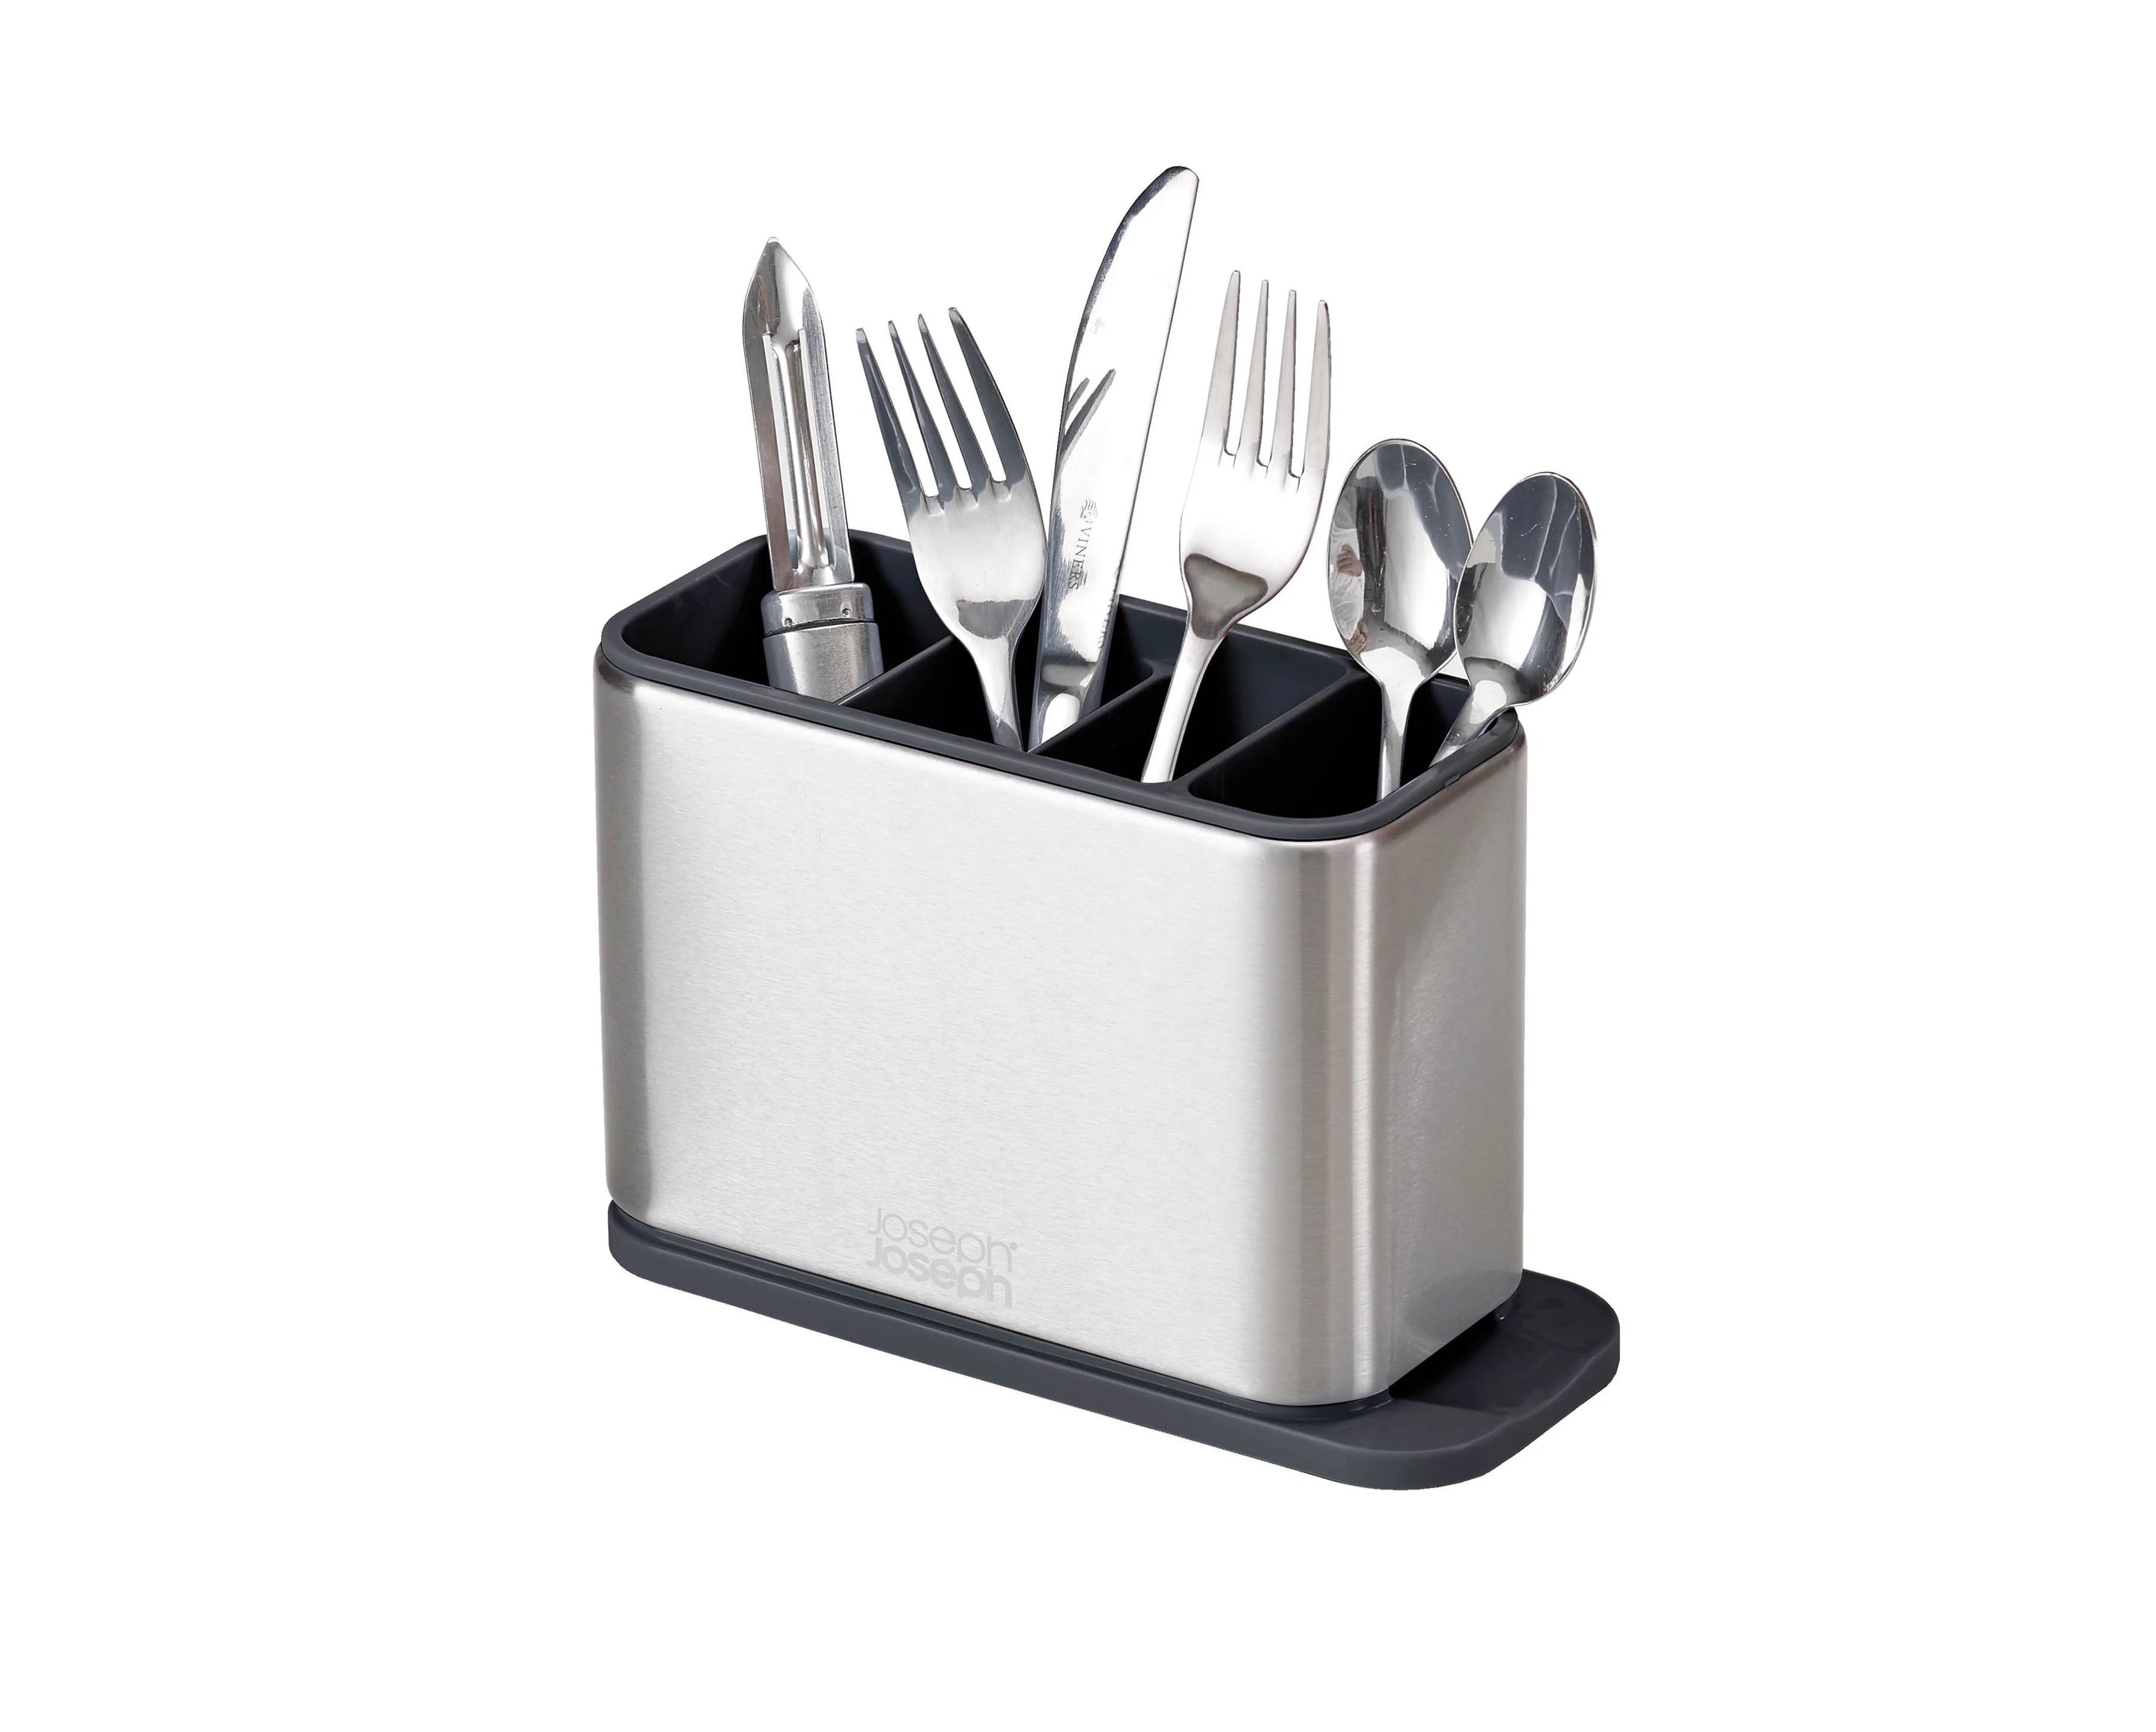 Surface™ Cutlery Drainer